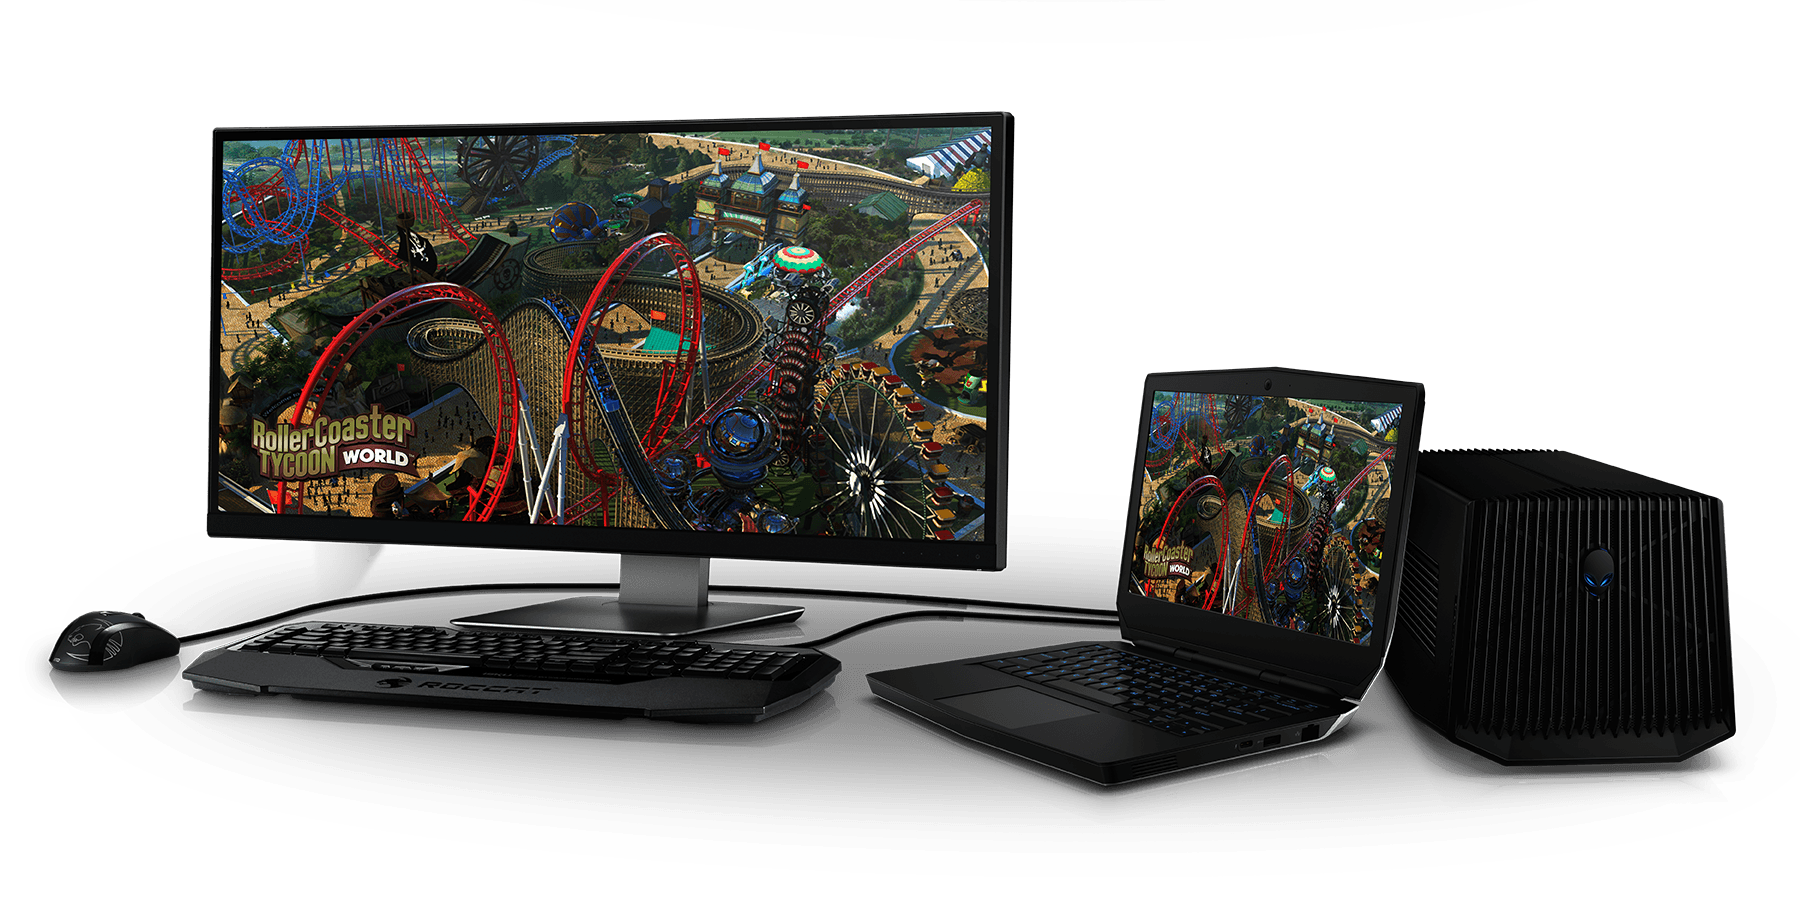 Gaming 13-inch laptop launch landing page